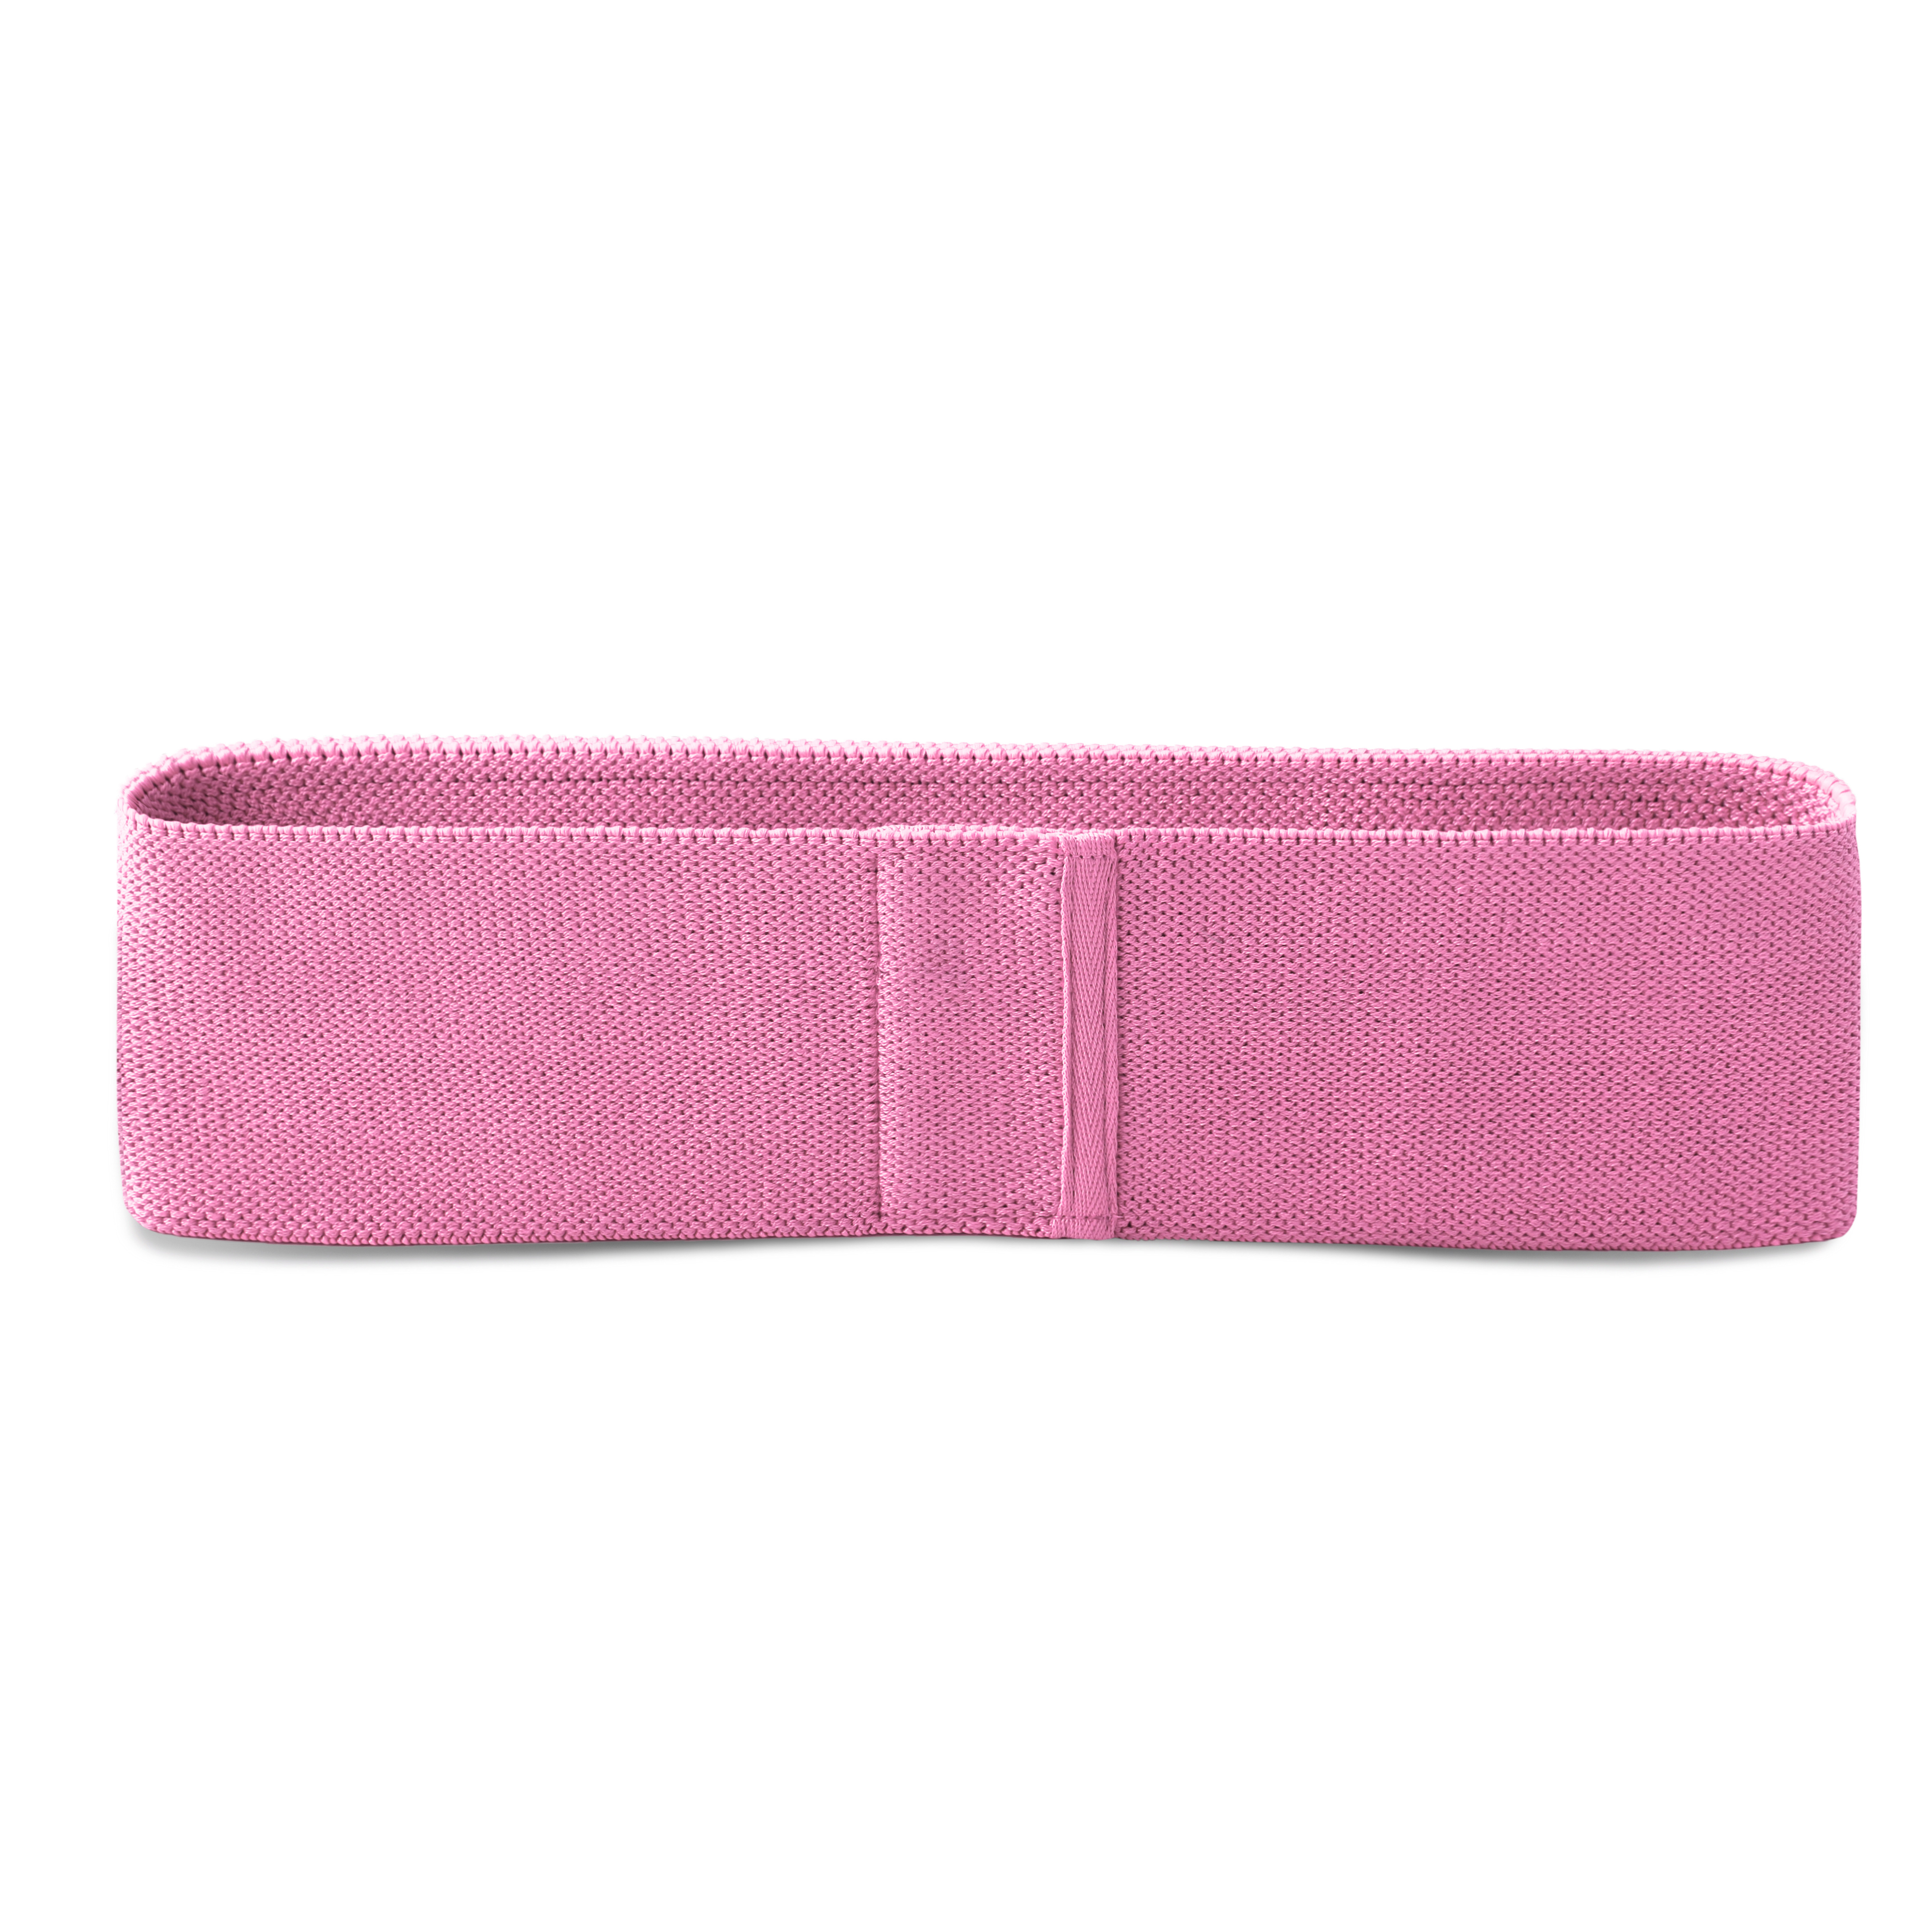 2022 Hip Resistance Band Strength Training GYM Fitness Exercises Band Hips For Booty Set Wholesale Customize Non Slip Hip Bands